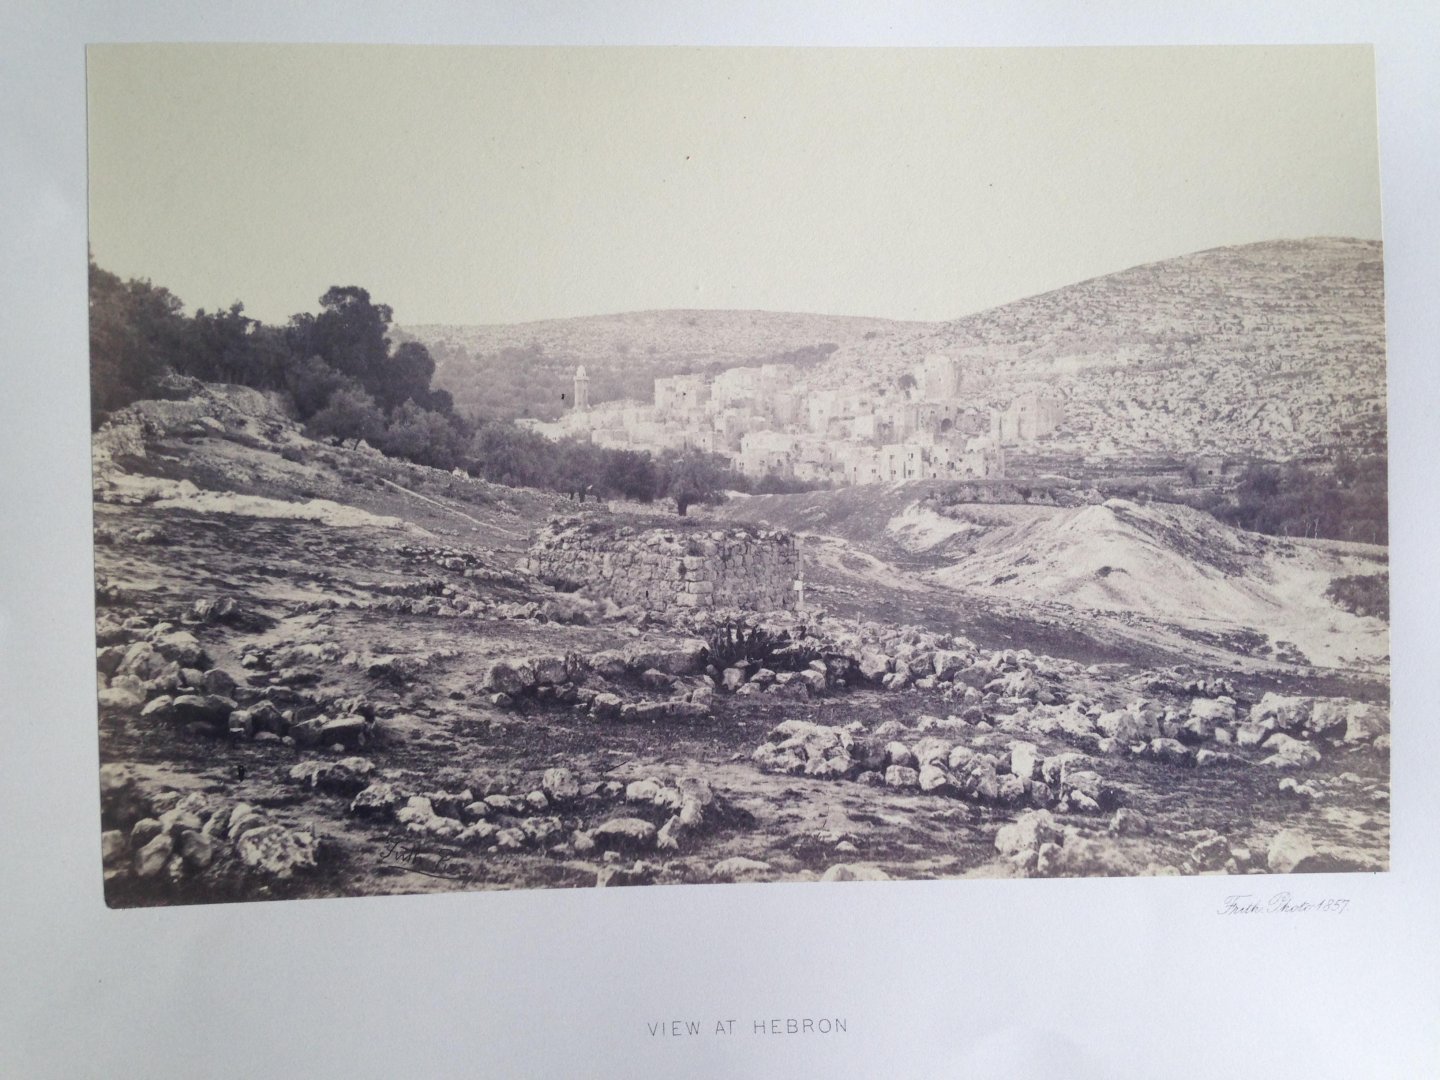 Frith, Francis - View at Hebron, Series Egypt and Palestine